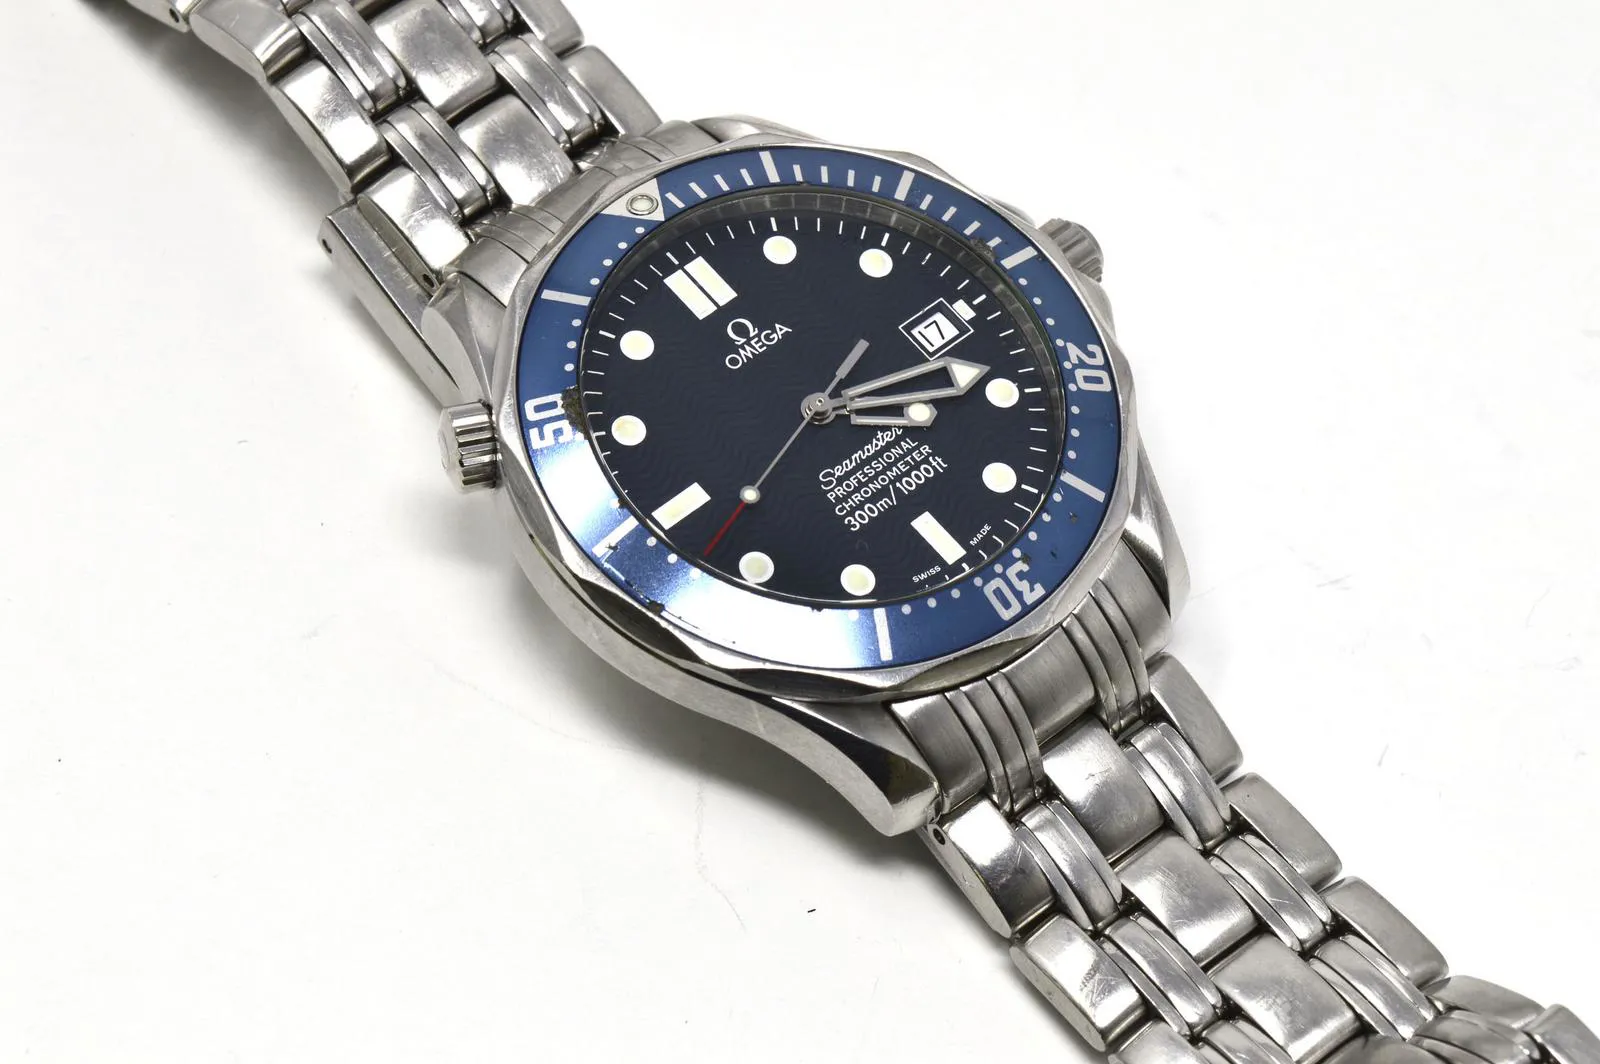 Omega Seamaster Diver 300M 25418000 41mm Stainless steel Blue 1